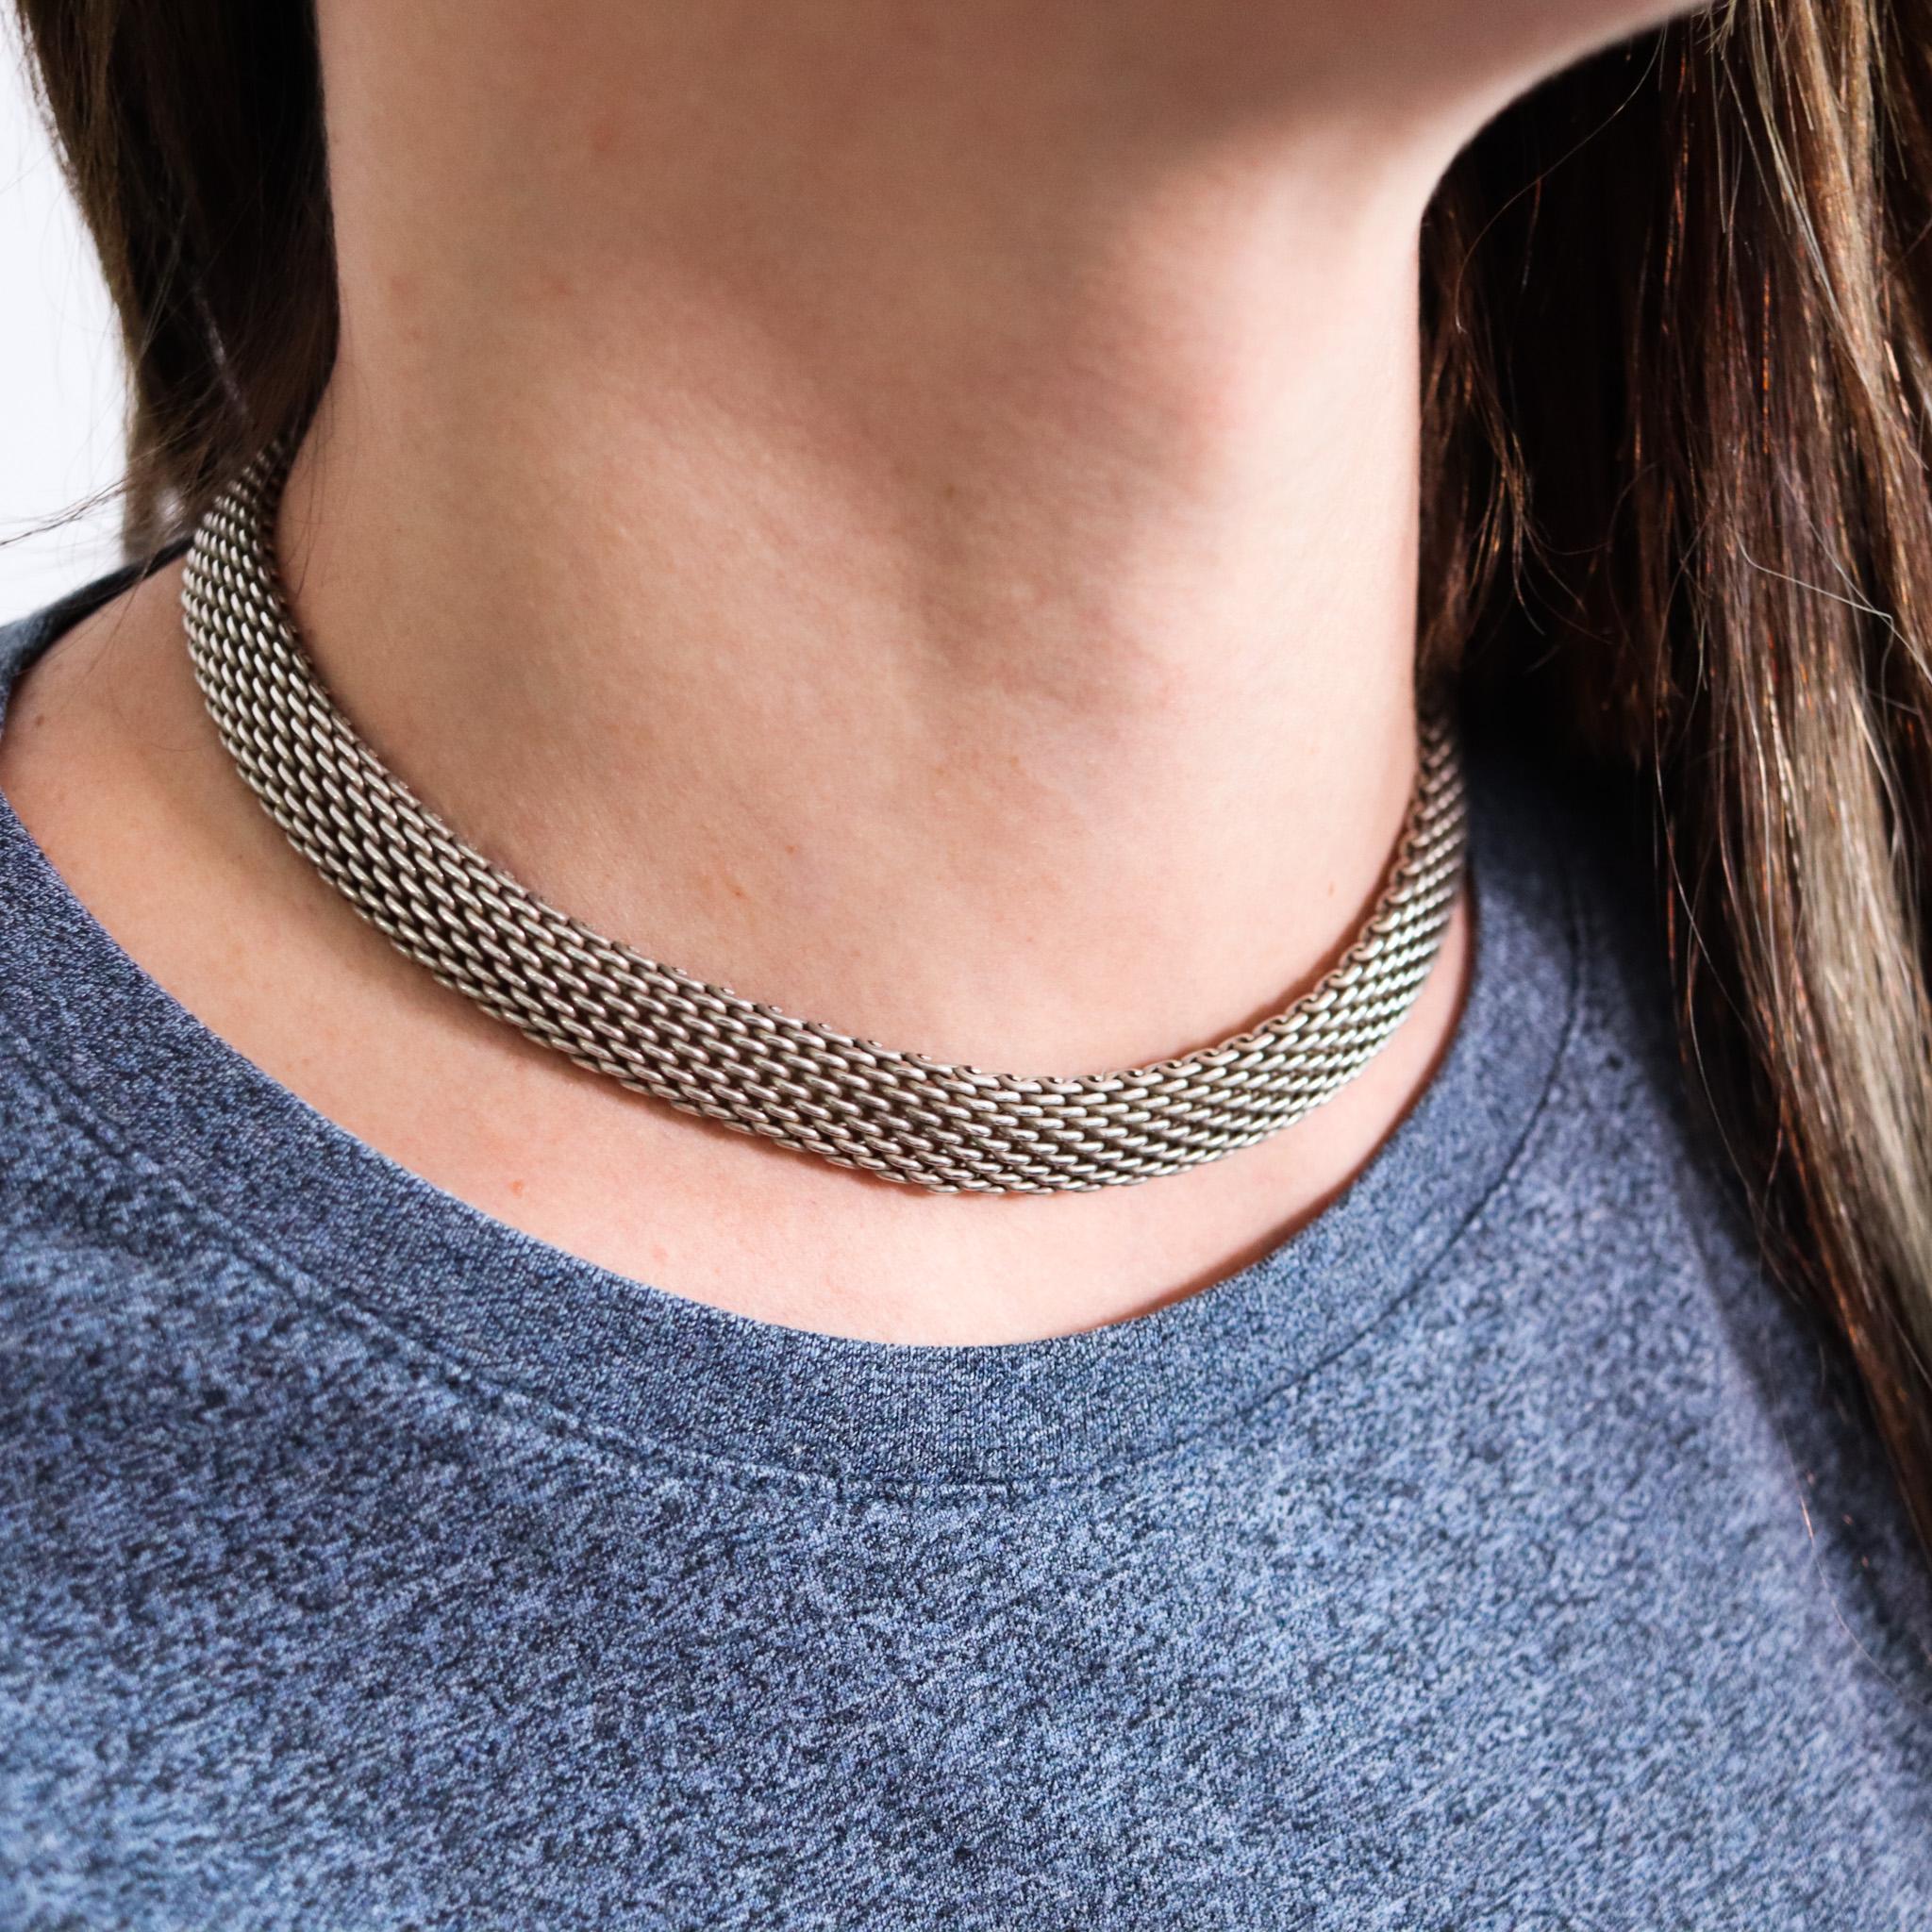 Necklace choker designed by Tiffany & Co.

An iconic and classic necklace, created by Tiffany & Co., back in the 1990's. It was crafted as a intricate mesh, woven from wires made up in solid .925/.999 sterling silver. It is fitted with a security